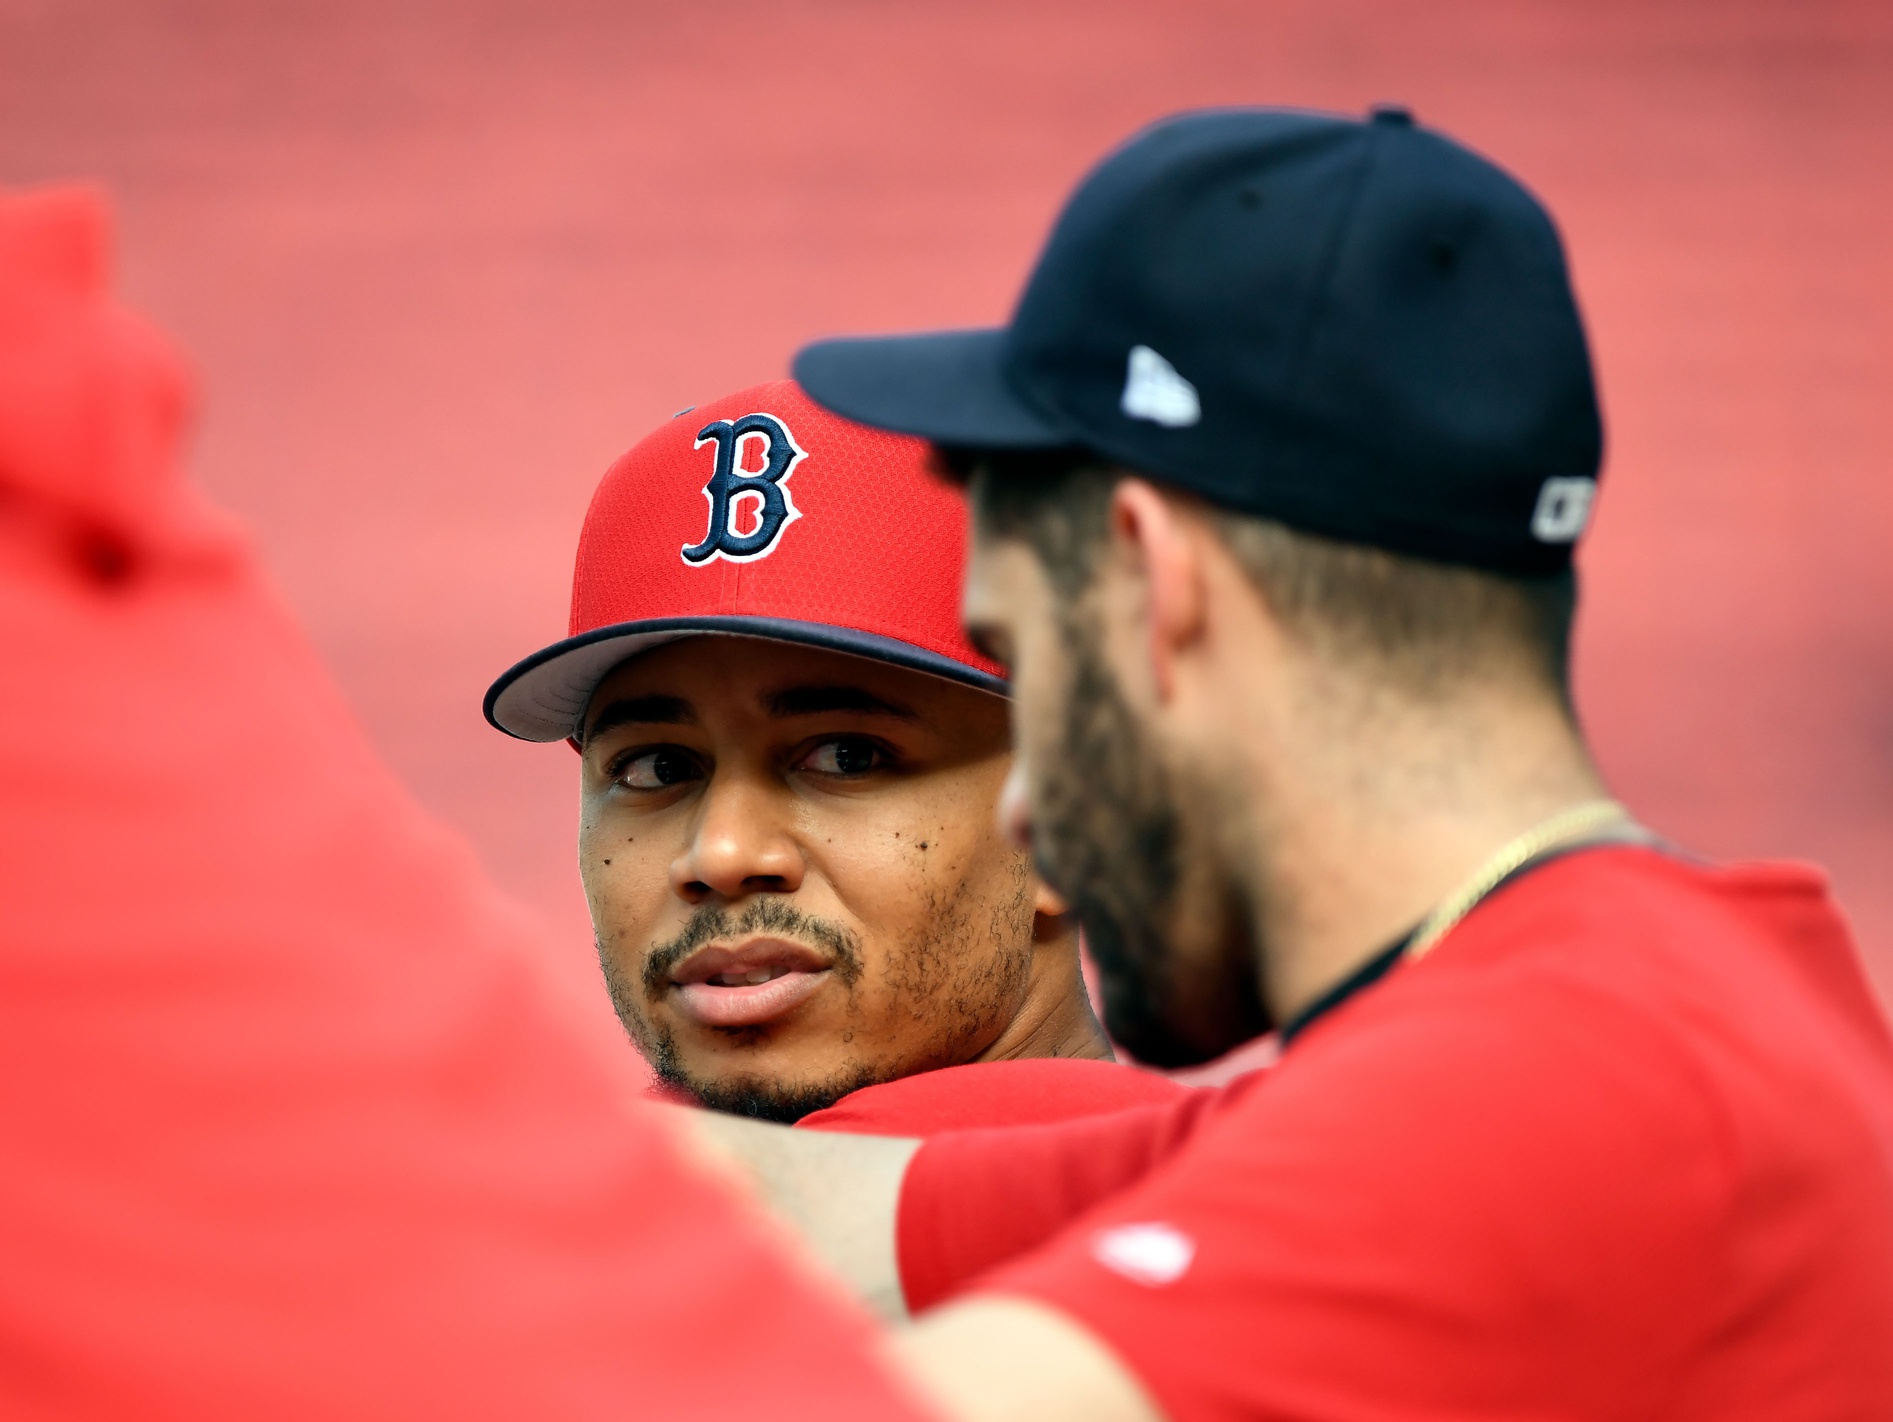 Dodgers' Mookie Betts dispels myths about relationship with Boston